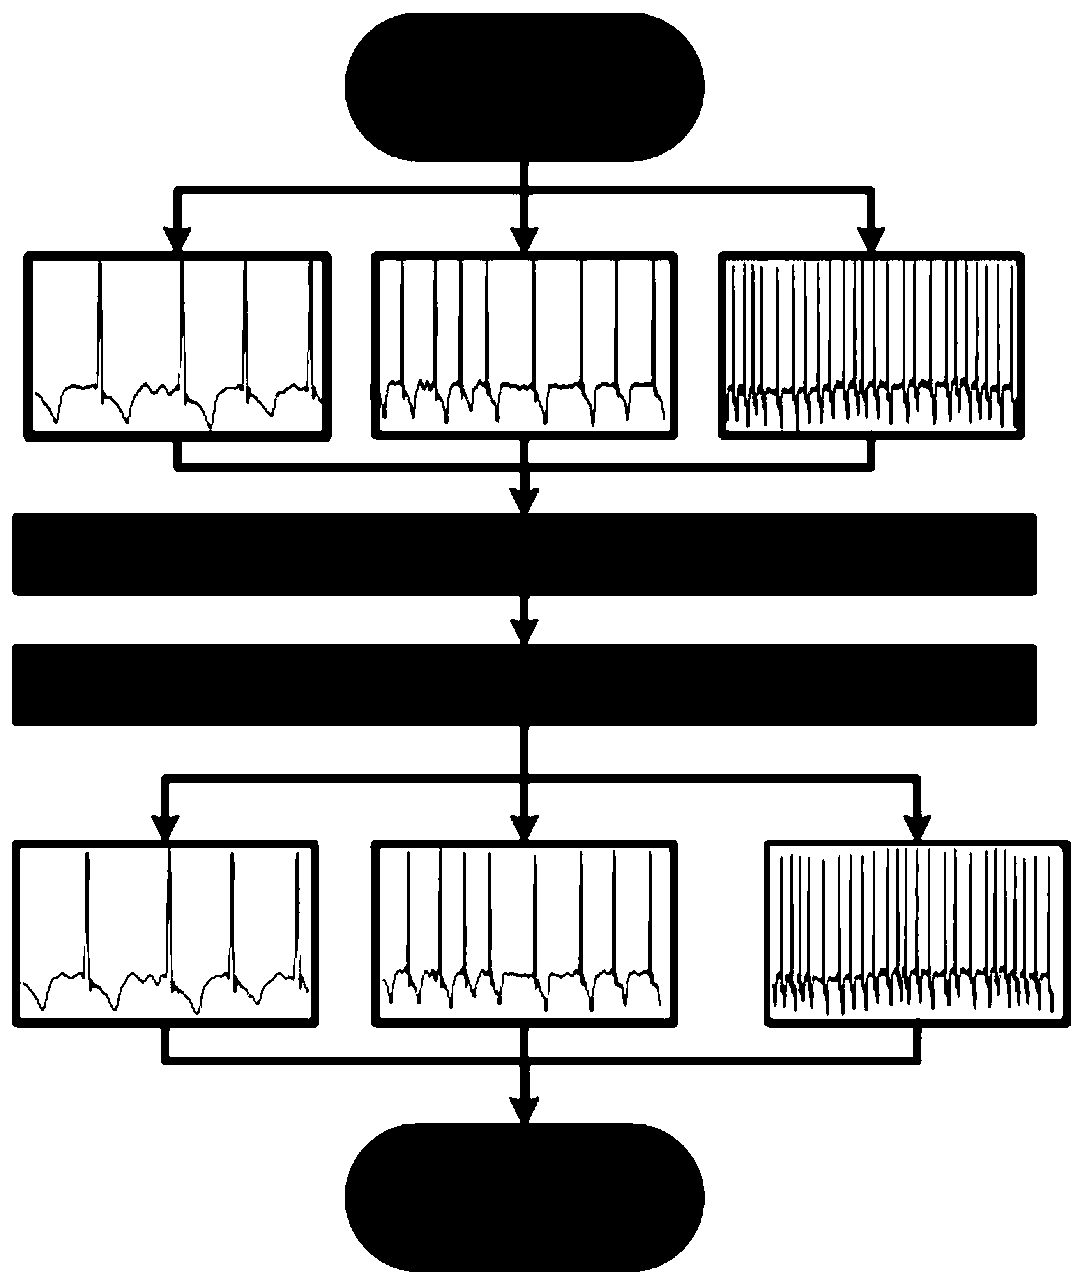 Electrocardiogram classification method and device based on wavelet transform and DCNN (Deep Convolutional Neural Networks)